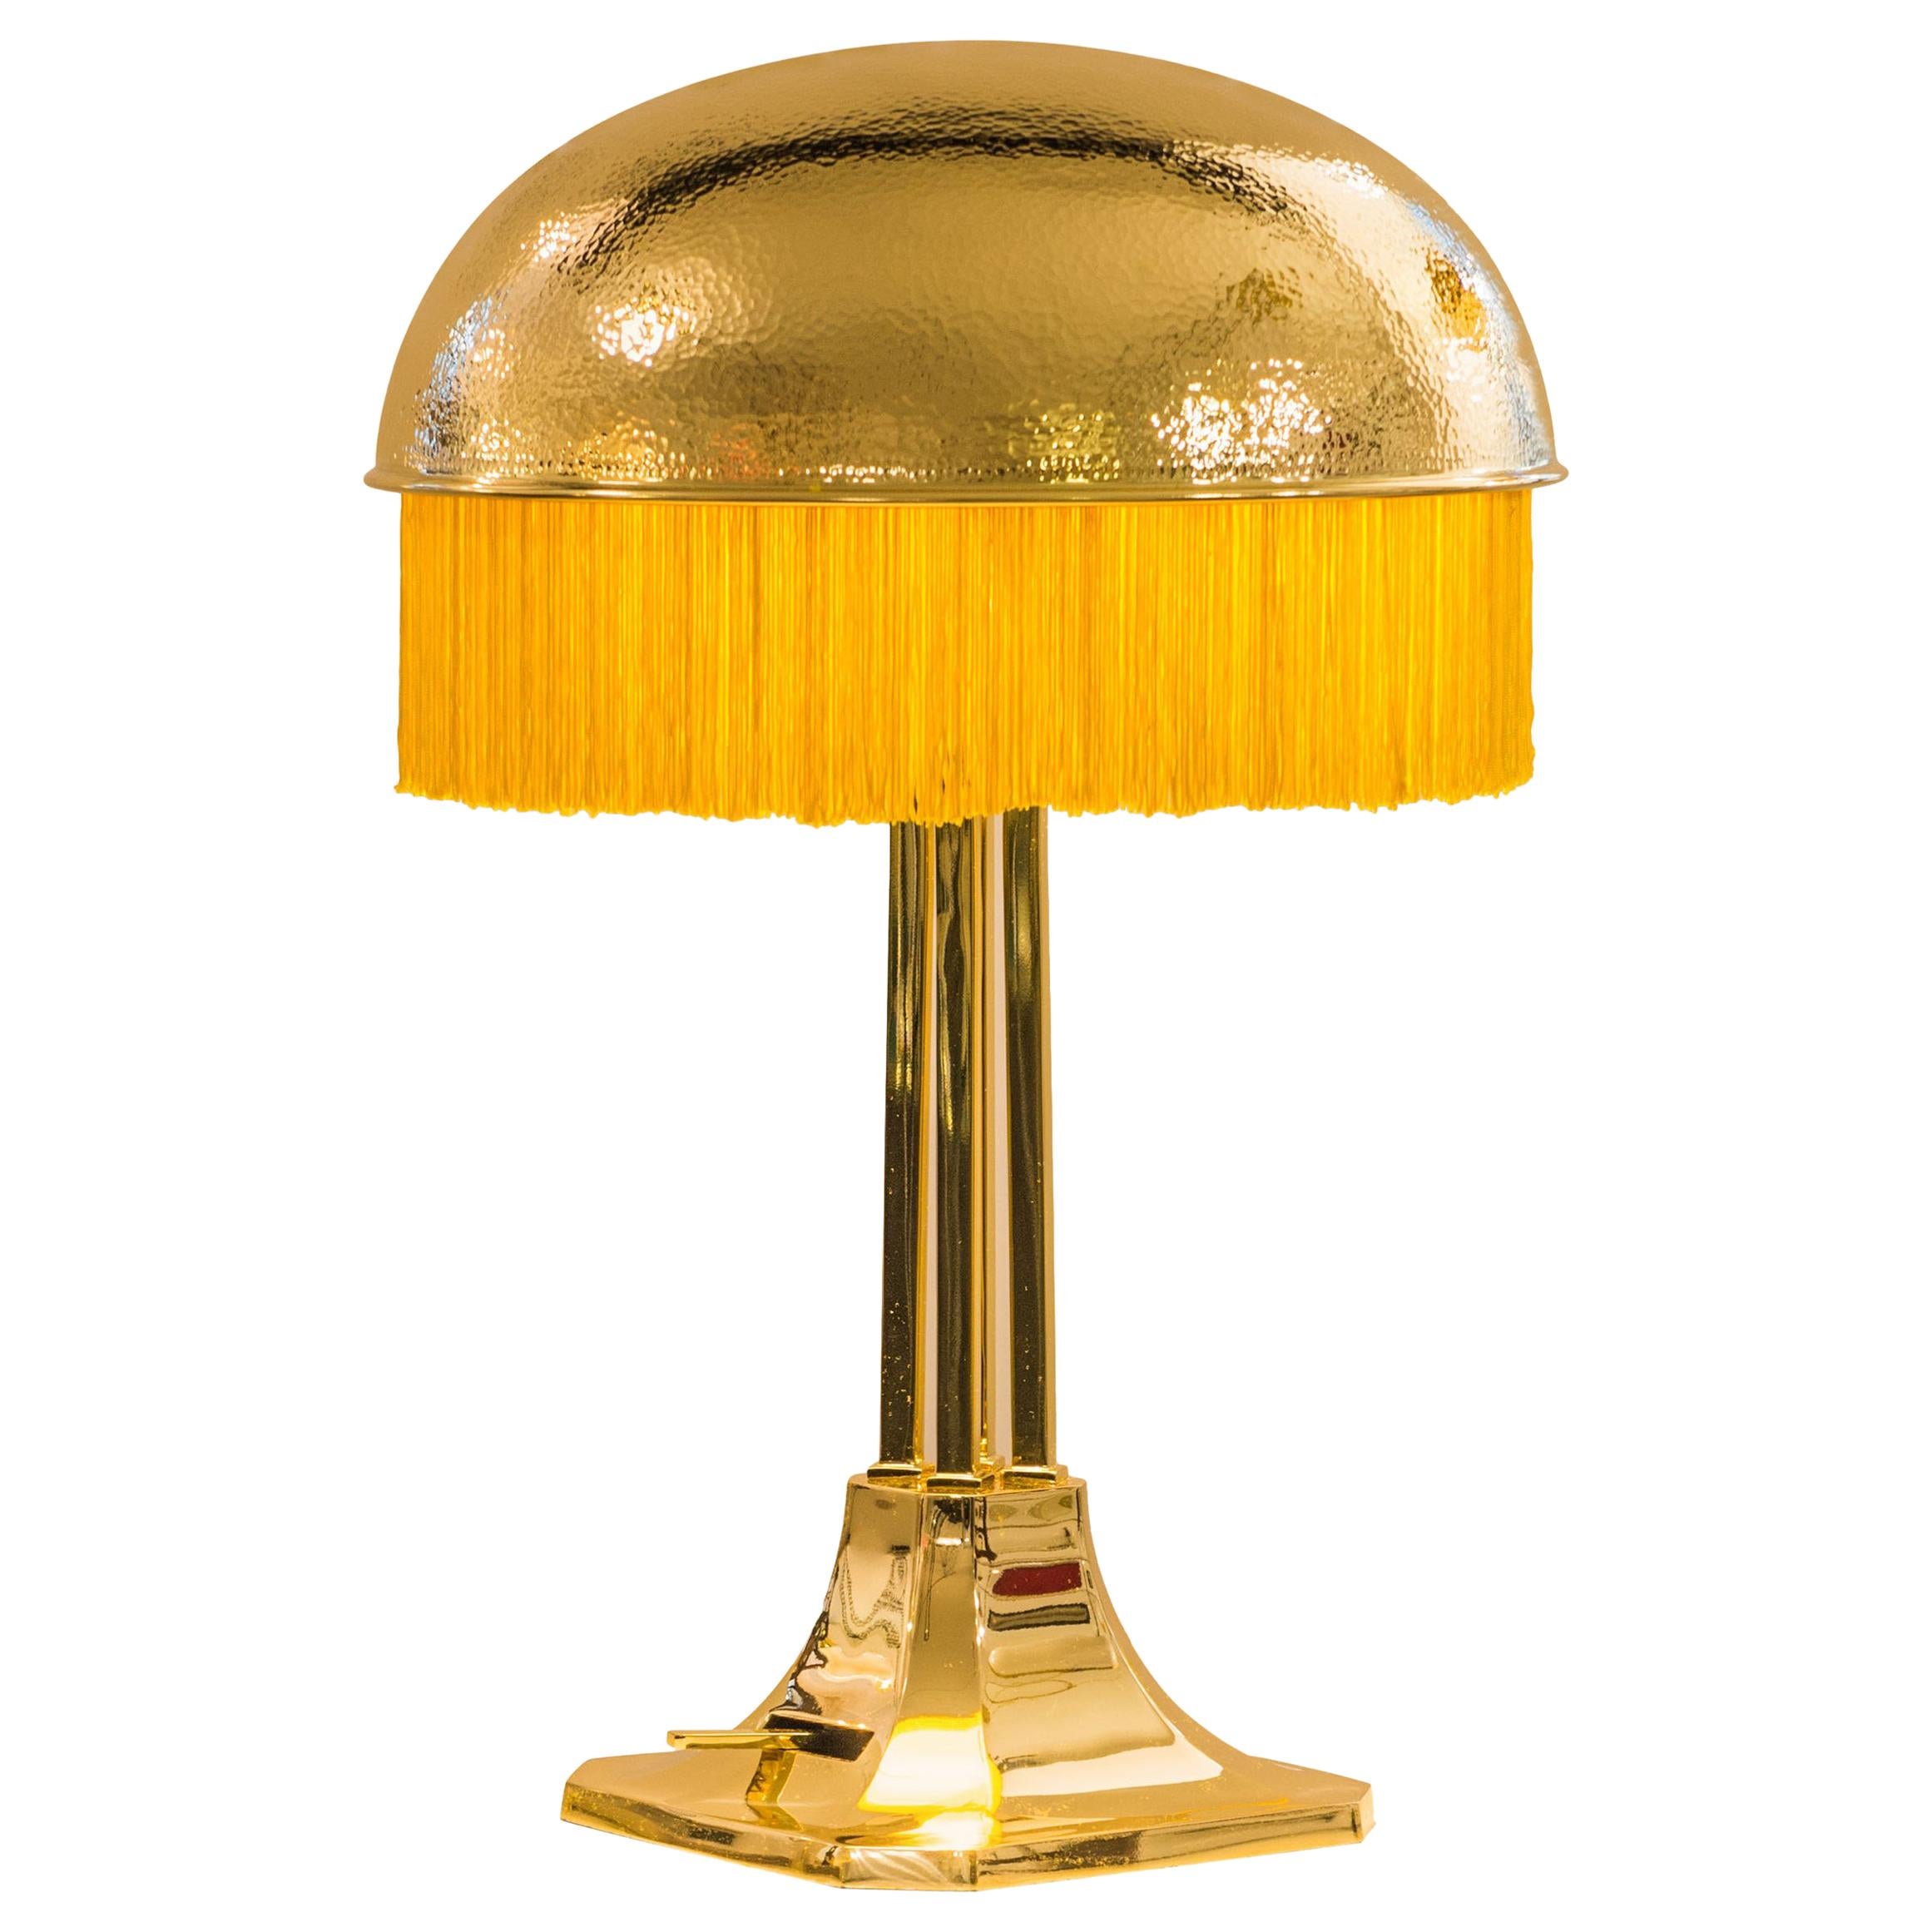 Famous Adolf Loos "Turnowsky" Table Lamp Brass Silk Design from 1900, Re-Edition For Sale